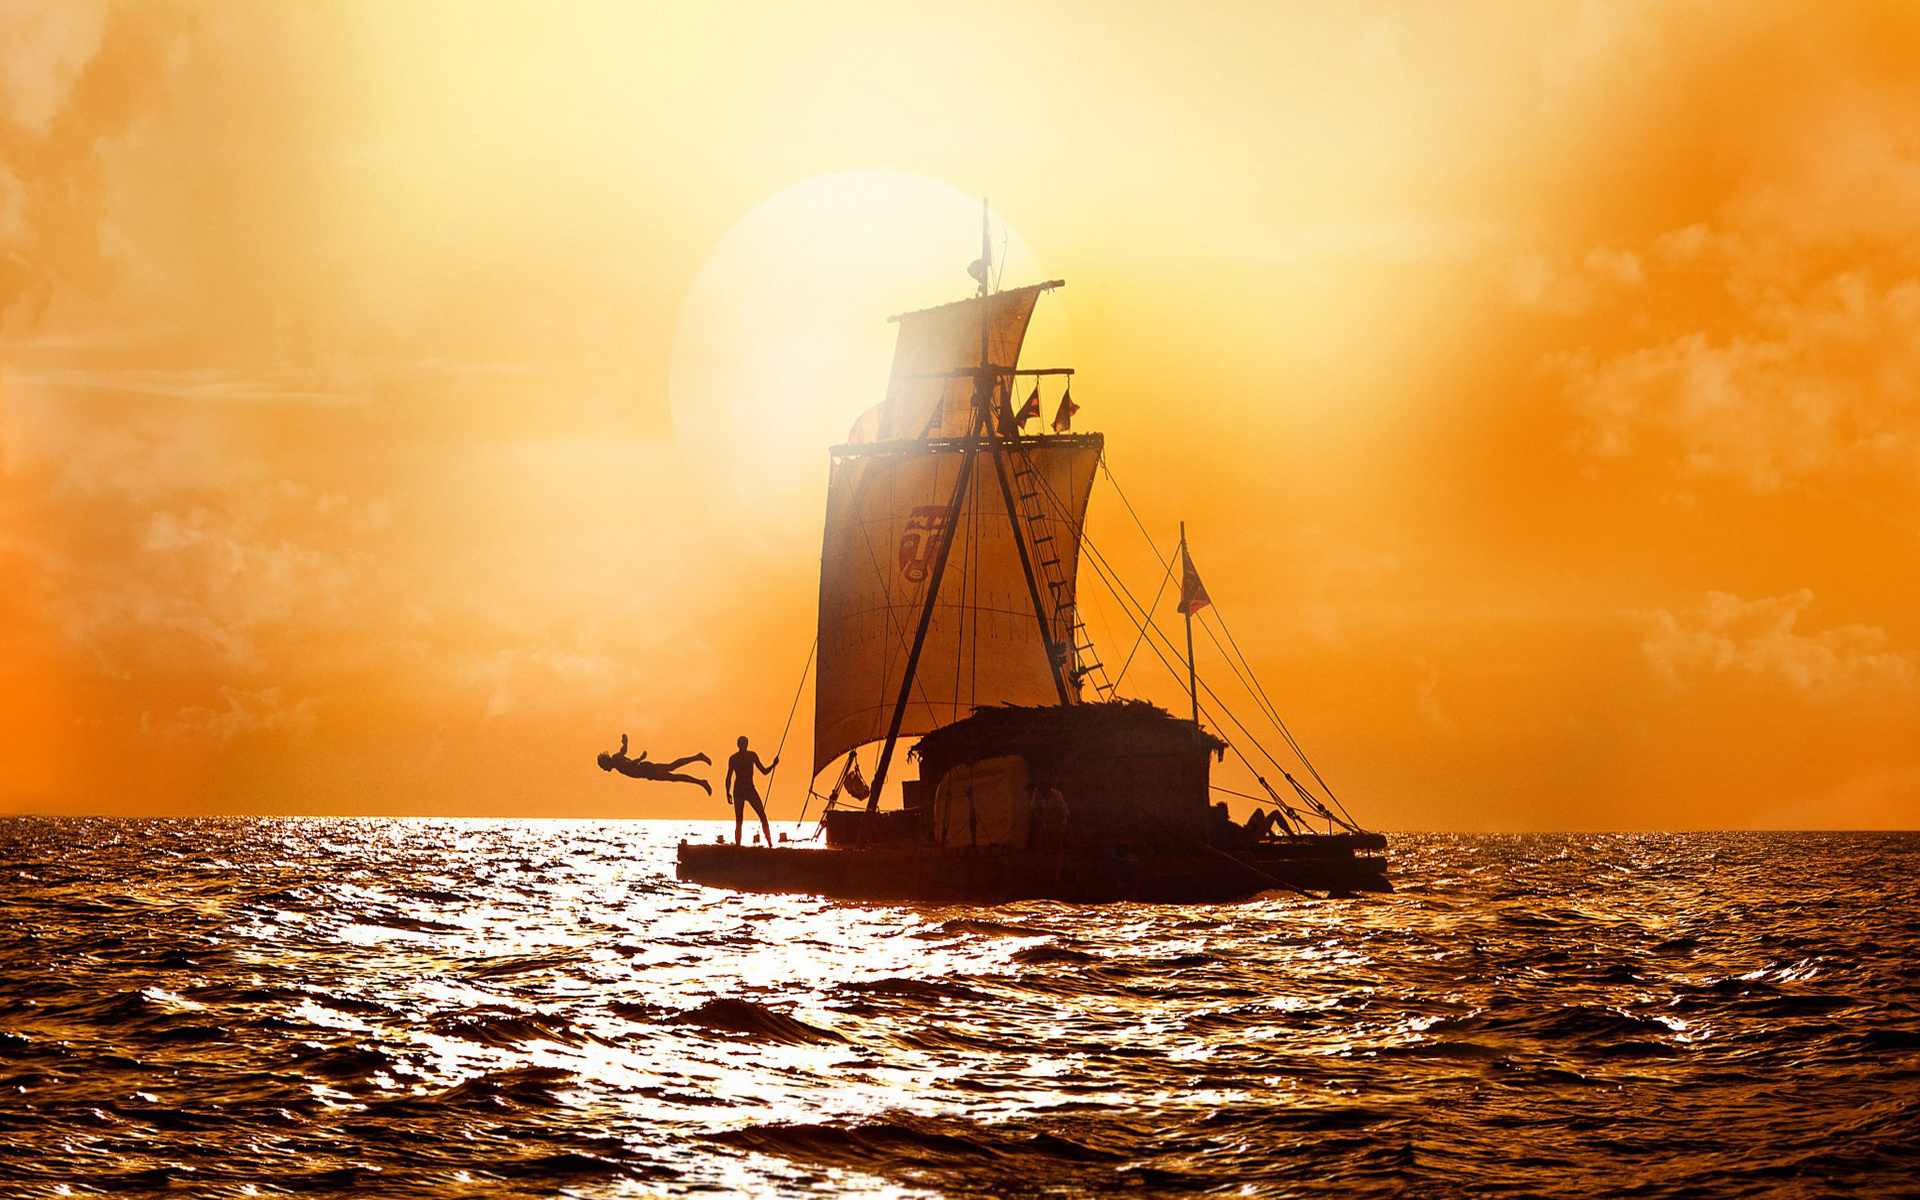 Kon-Tiki (Movie): The trip lasted from April 28th, 1947 to August 7th, 1947. 1920x1200 HD Background.